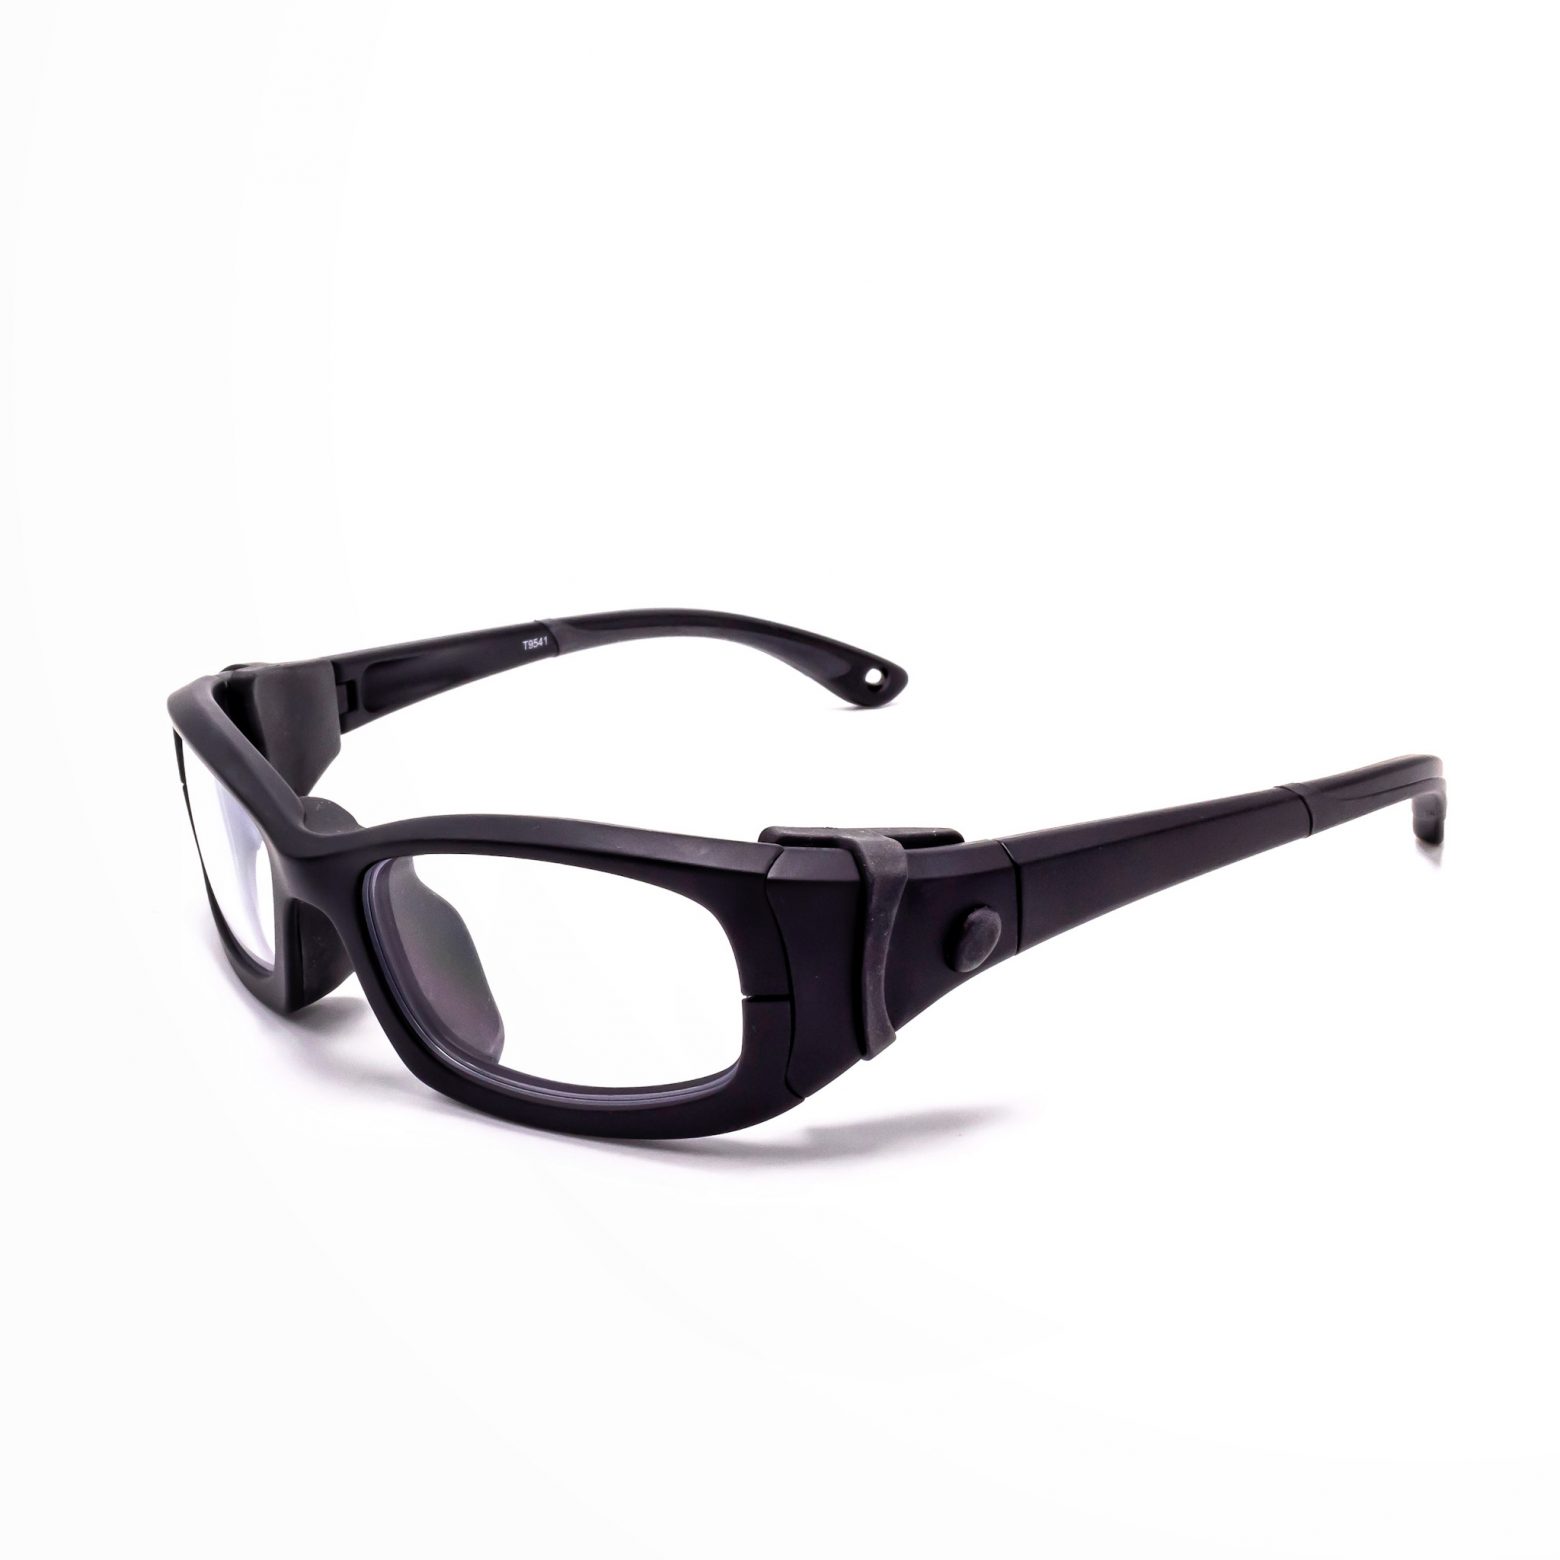 Prescription Safety Sunglasses for Eye Protection